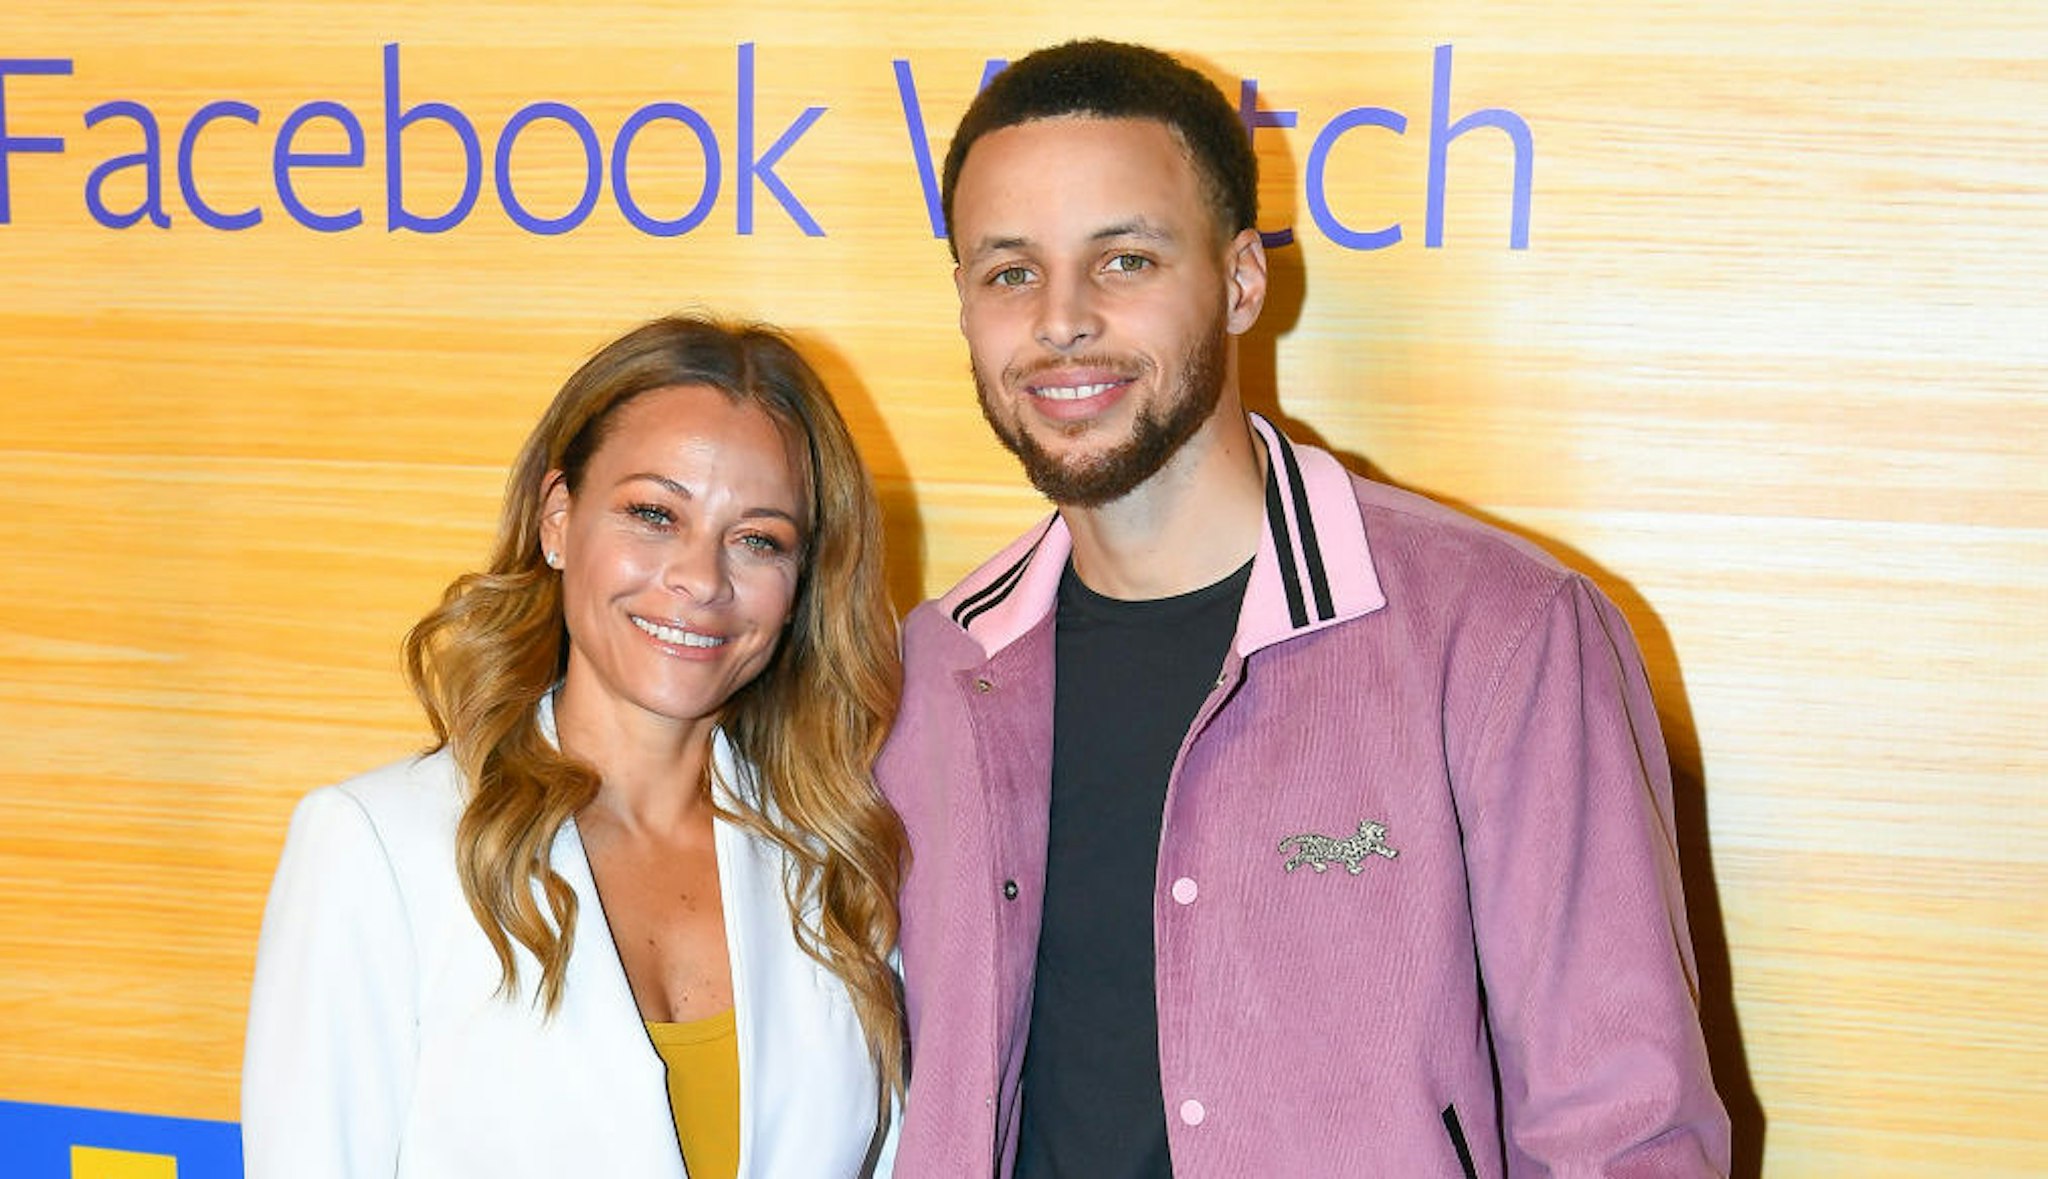 Sonya Curry and NBA Player Stephen Curry of the Golden State Warriors attend the "Stephen Vs The Game" Facebook Watch Preview at 16th Street Station on April 1, 2019 in Oakland, California.